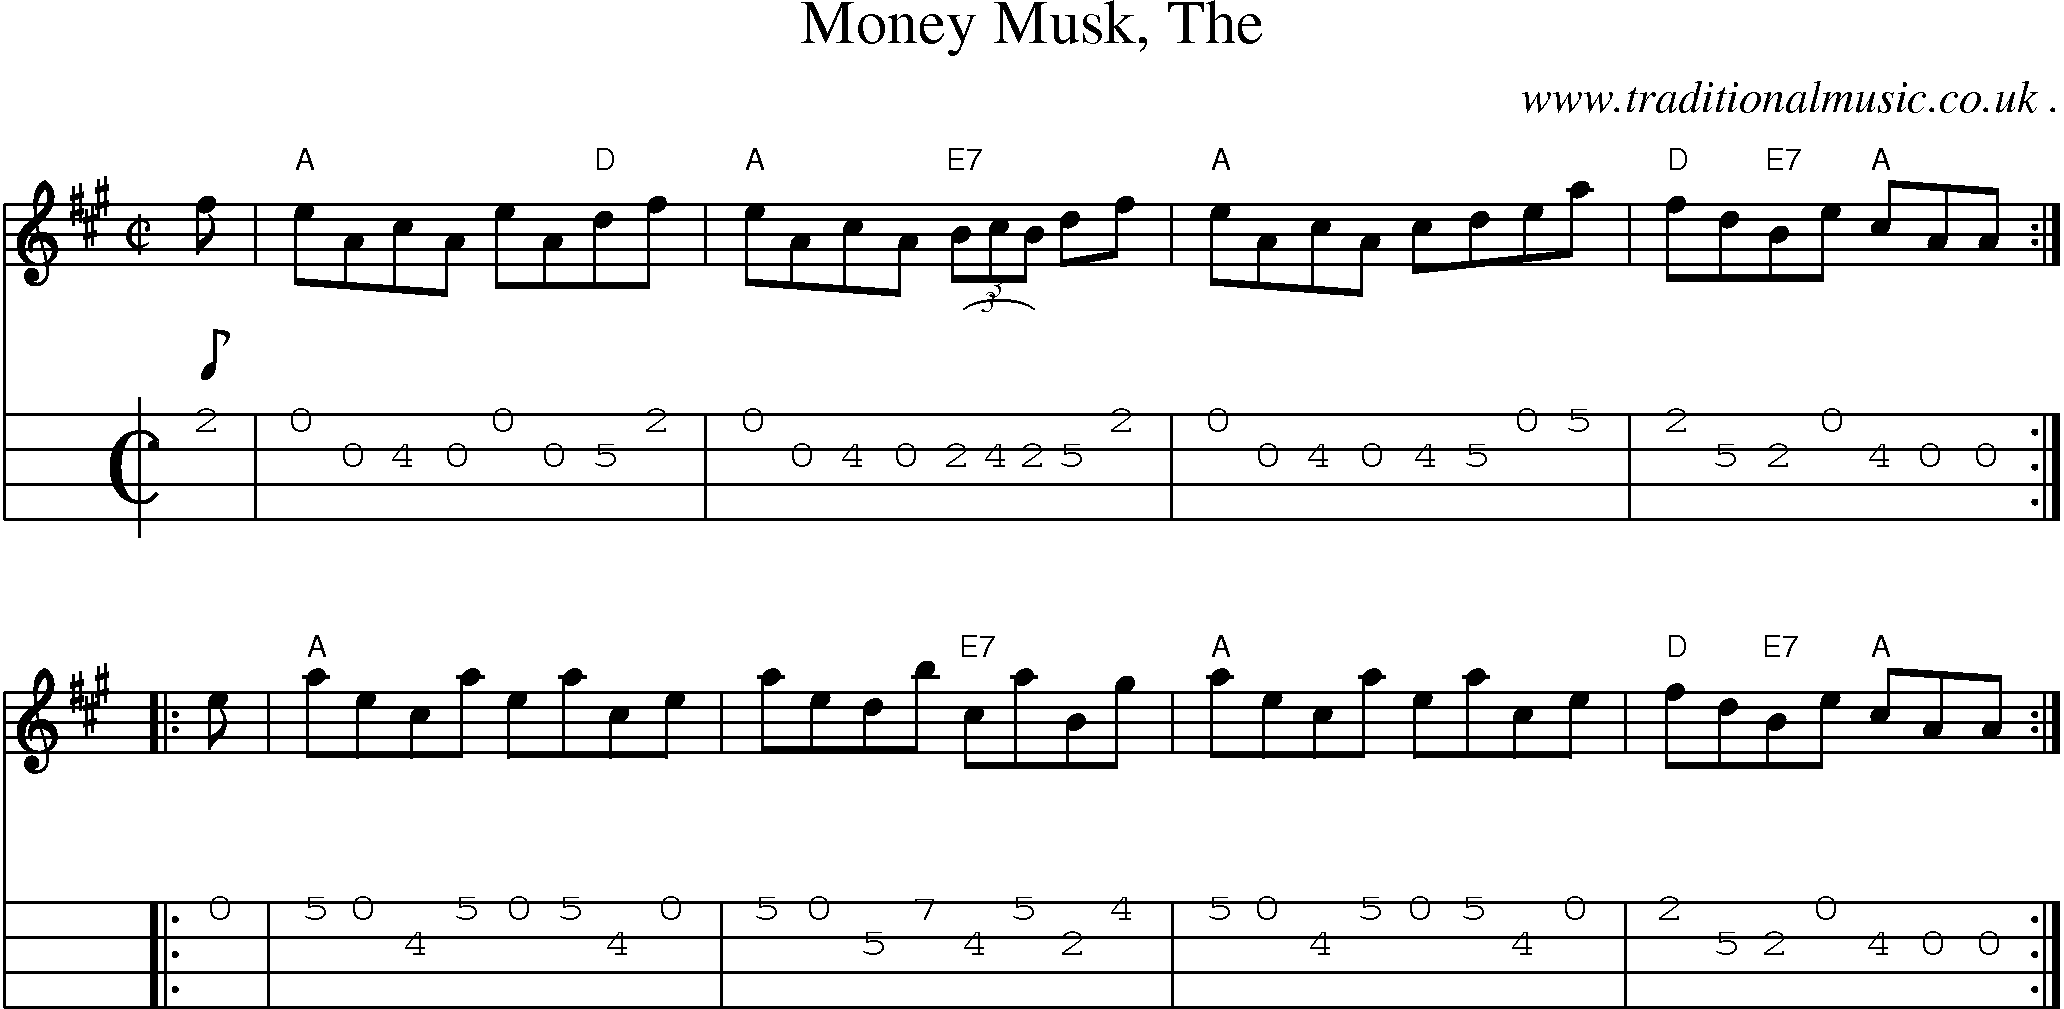 Music Score and Mandolin Tabs for Money Musk The